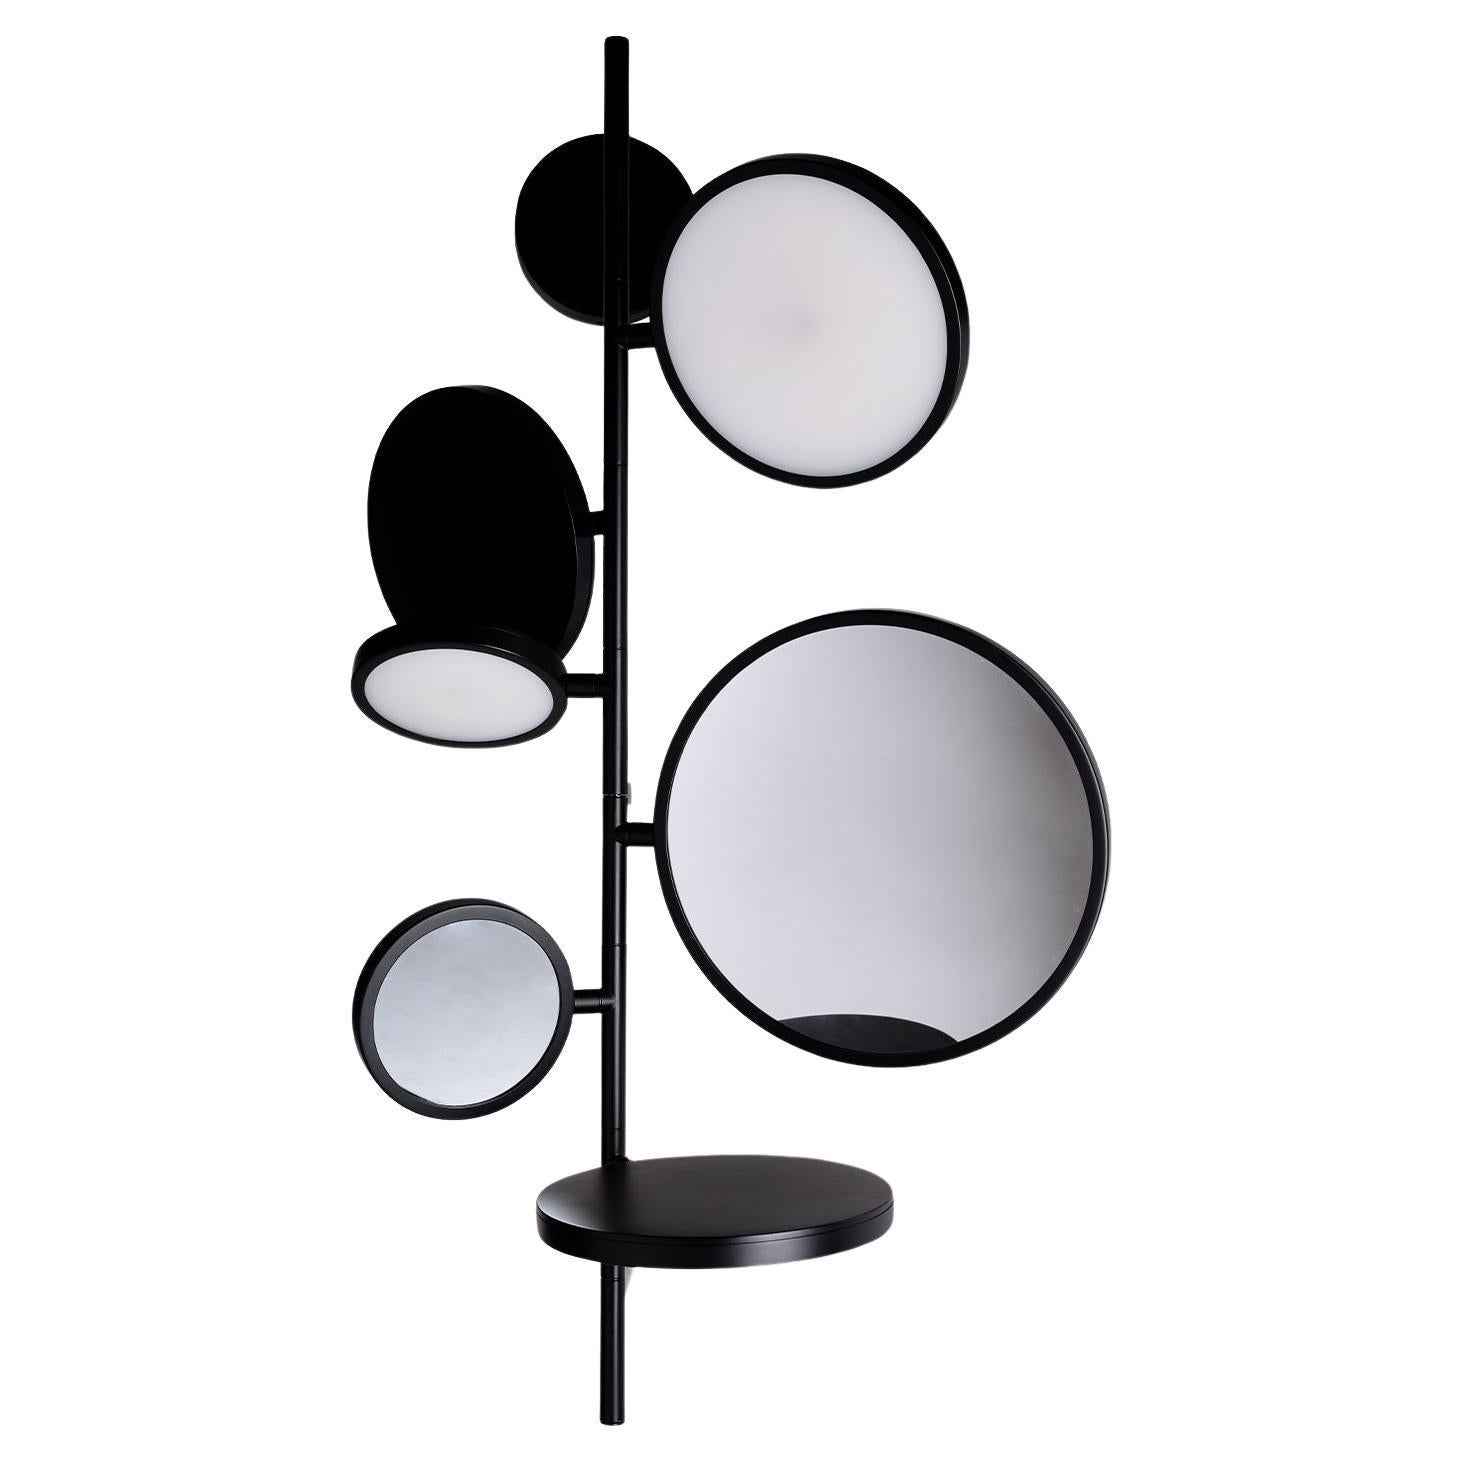 DCW Editions Tell Me Stories Mirror Light in Black by Giulia Liverani